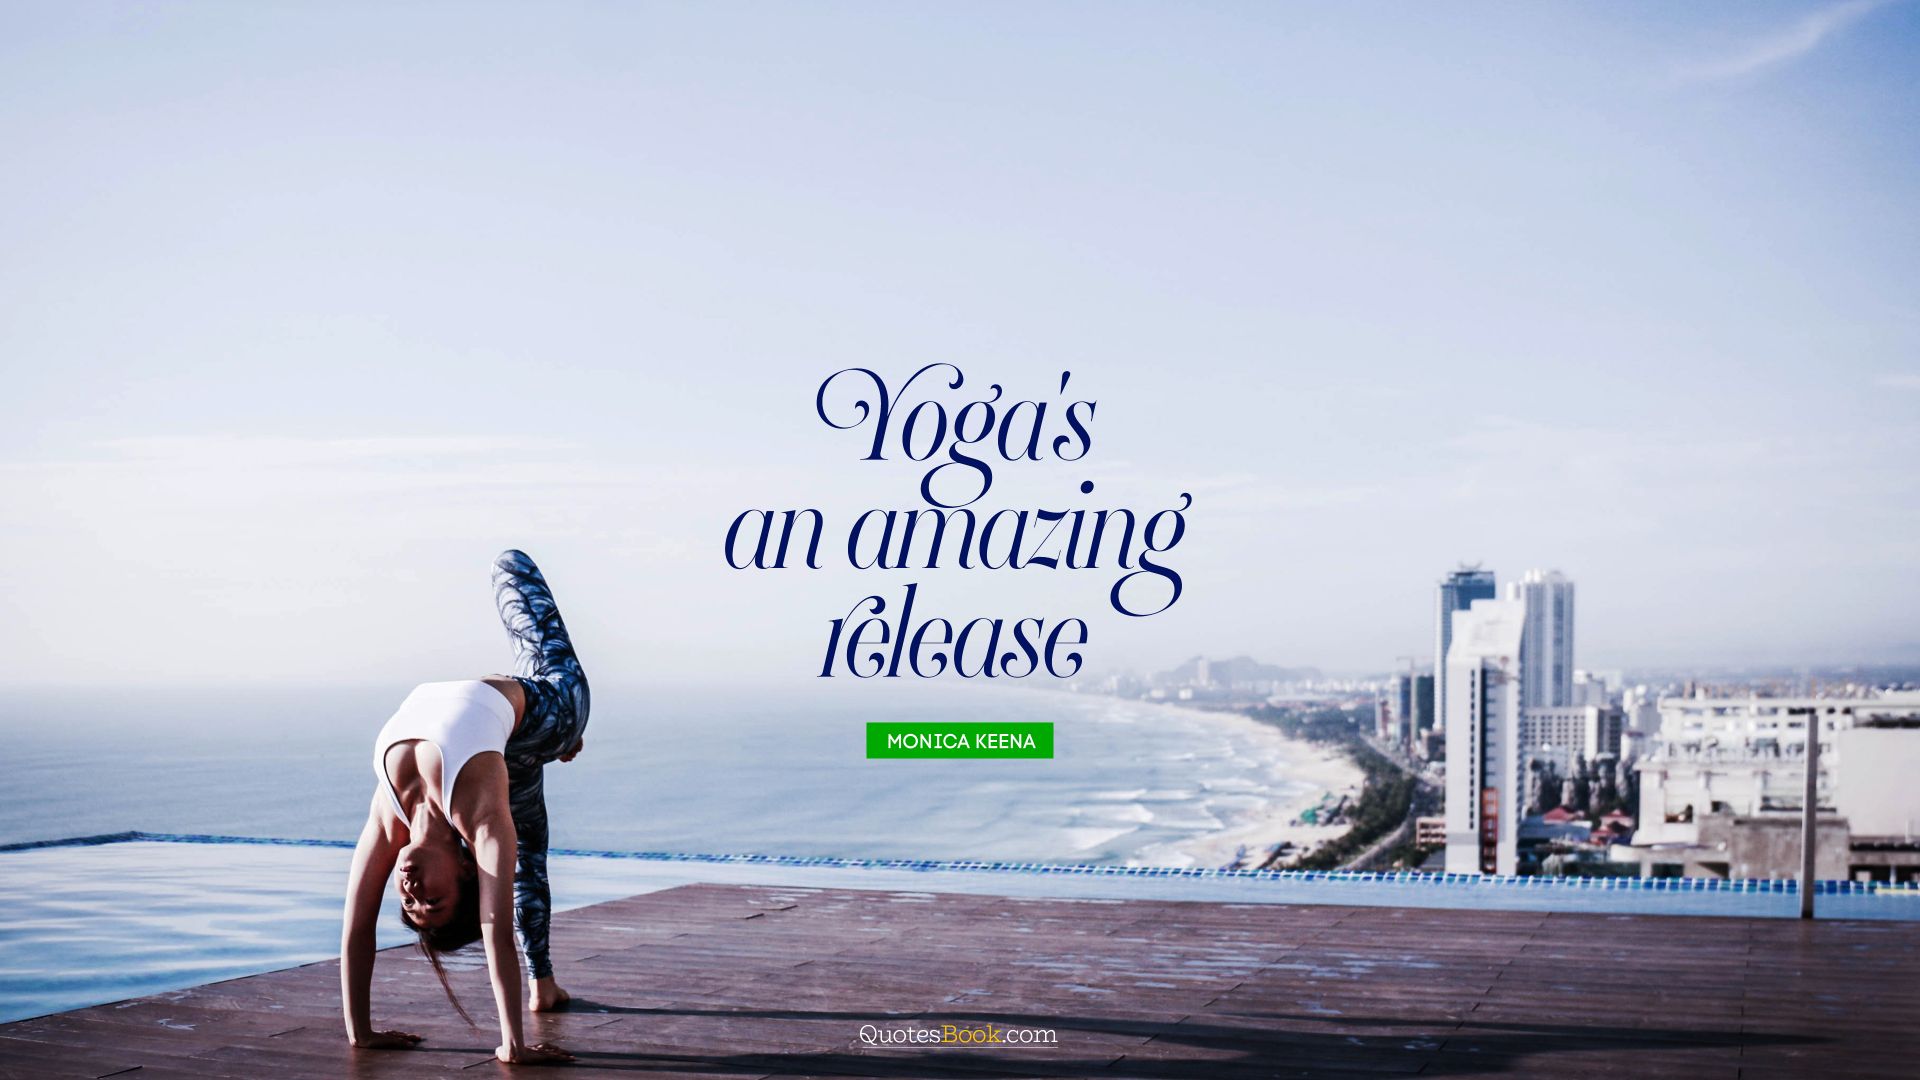 Yoga's an amazing release. - Quote by Monica Keena